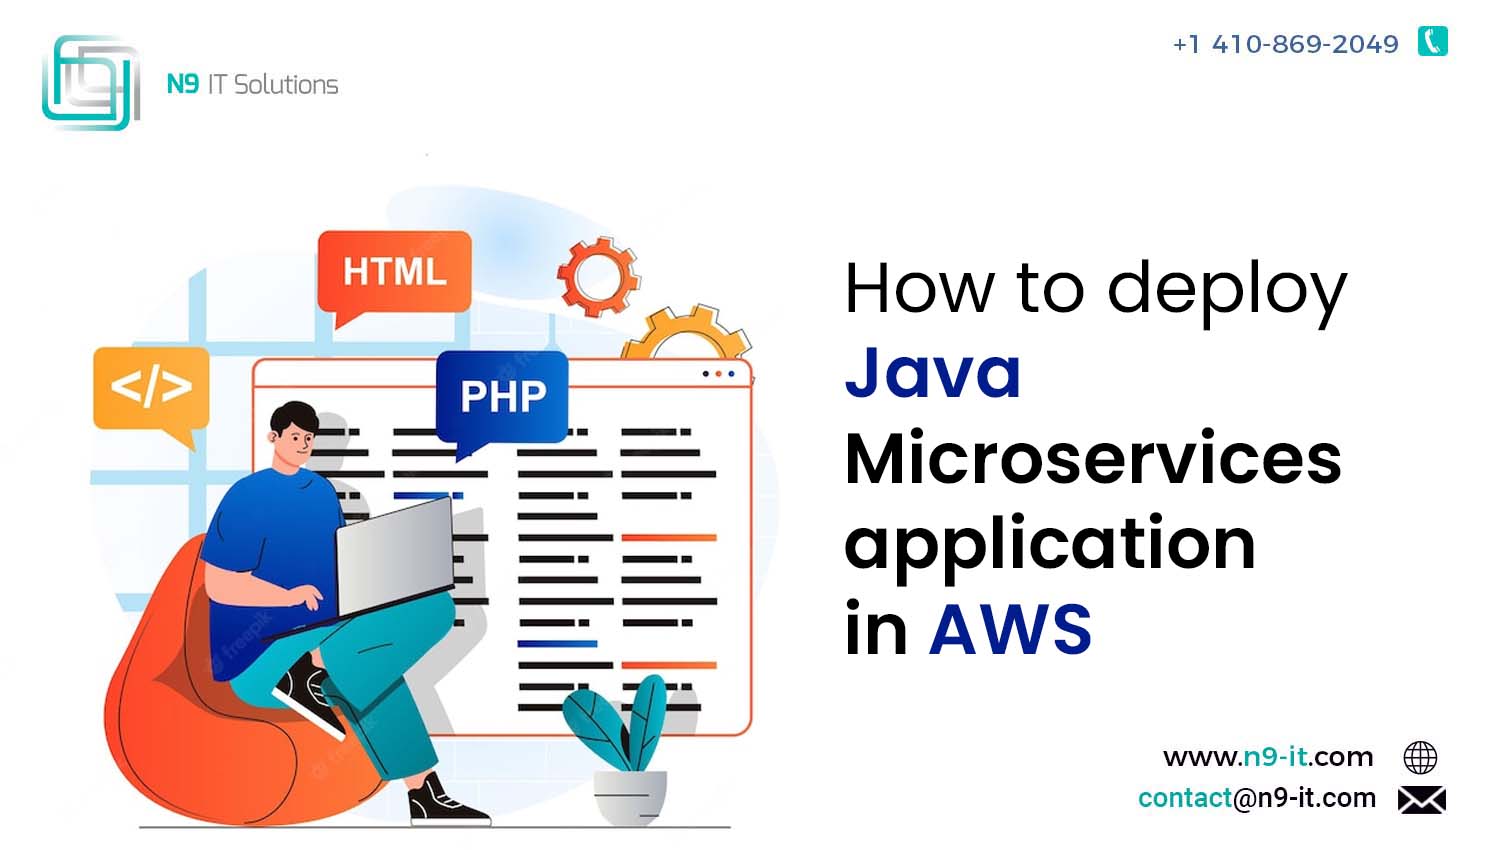 How to deploy Java Microservices application in AWS